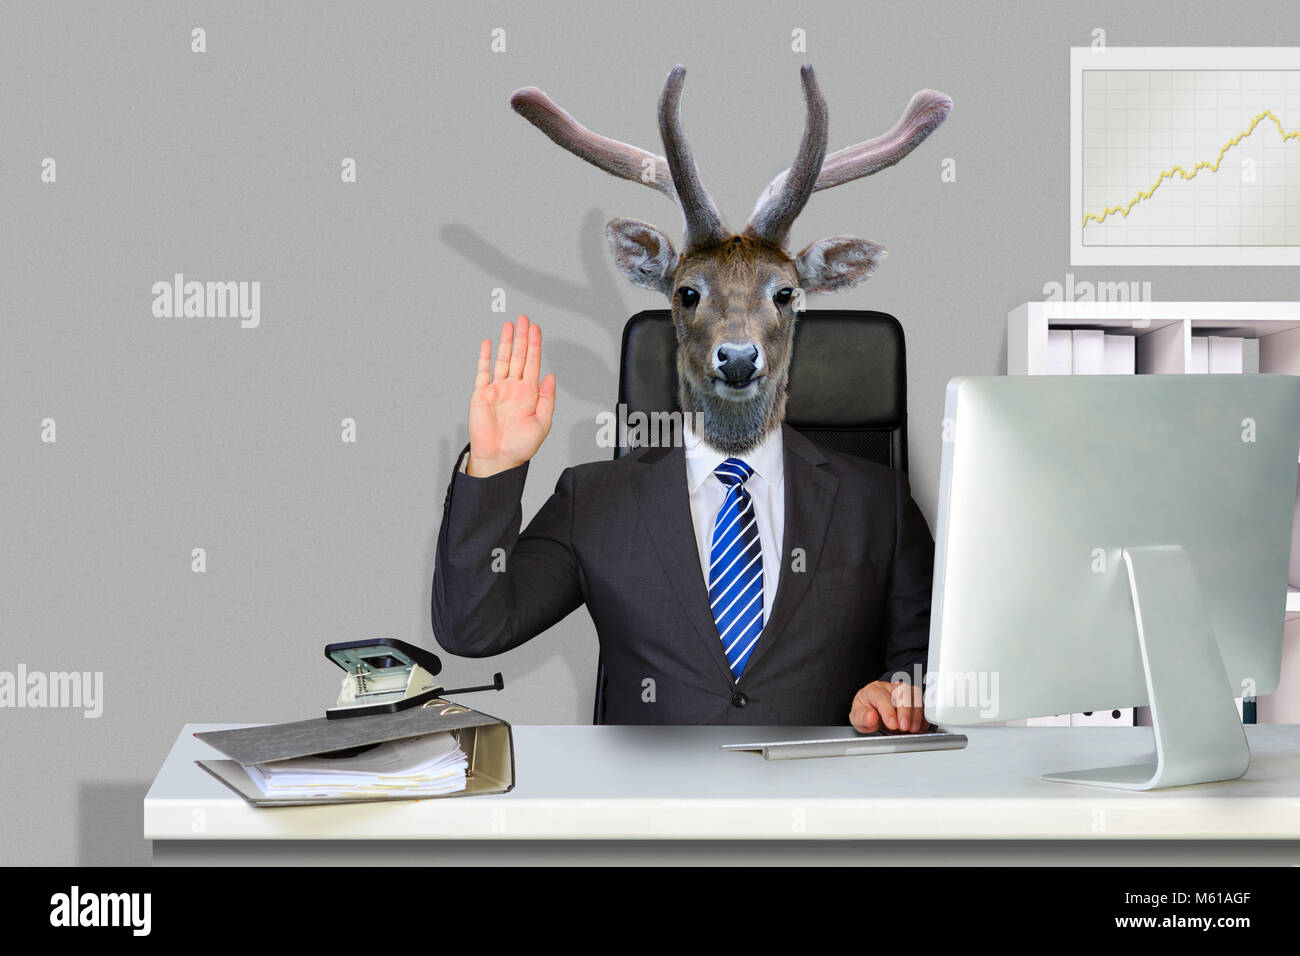 symbolic picture of apathetic colleague, bureaucracy and bad working atmosphere in the office Stock Photo